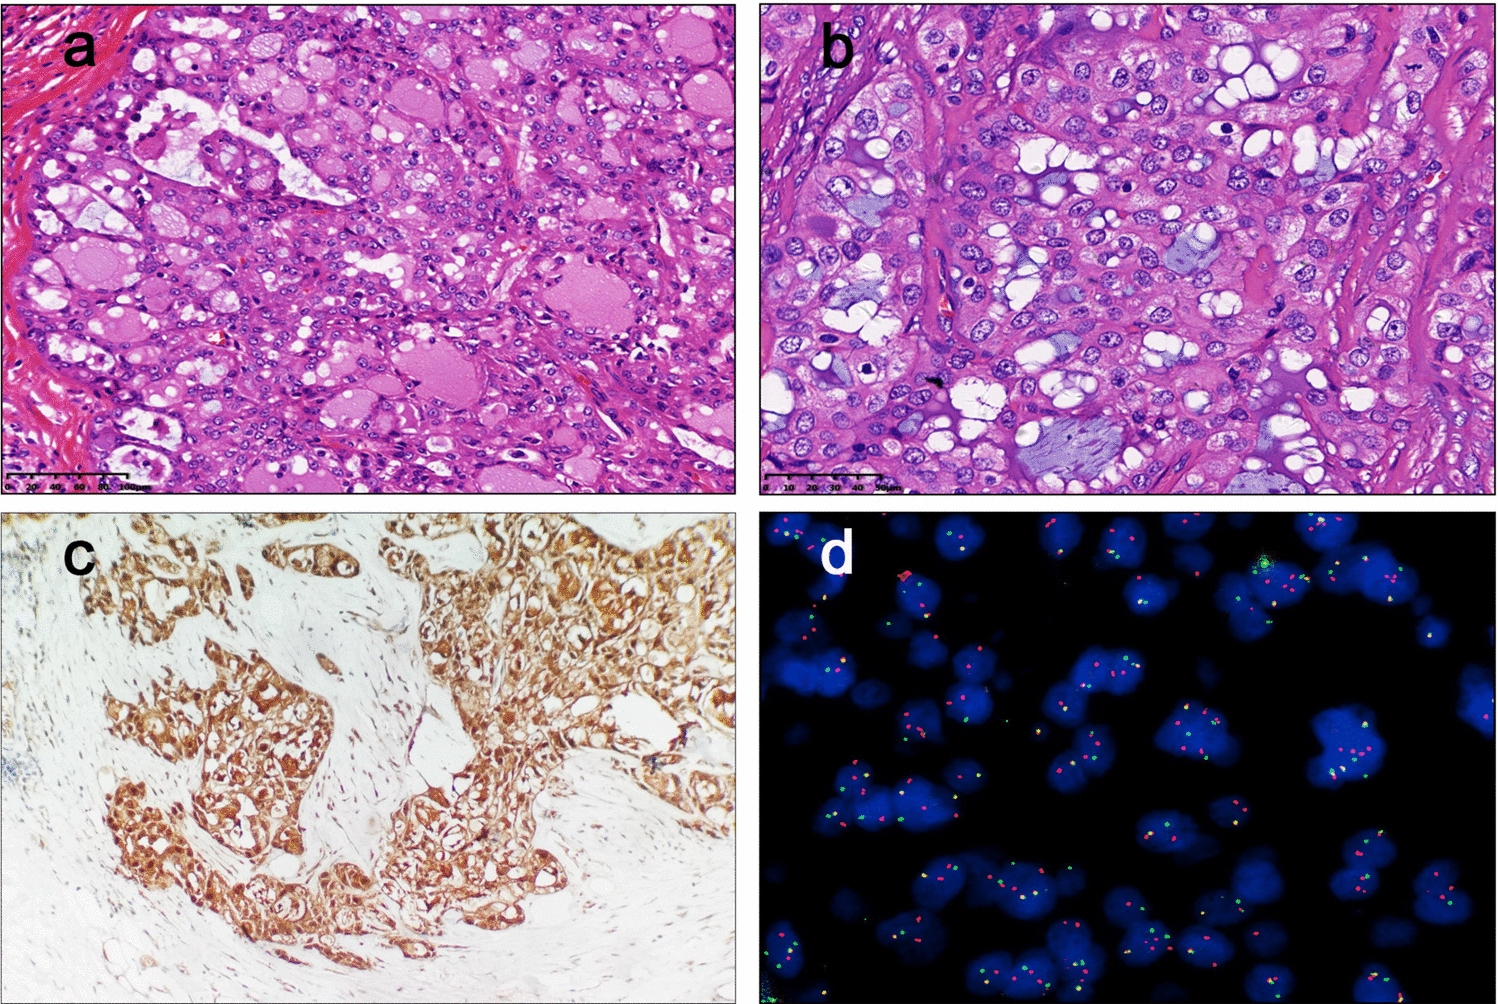 Secretory breast carcinoma: clinicopathological features and prognosis of 52 patients